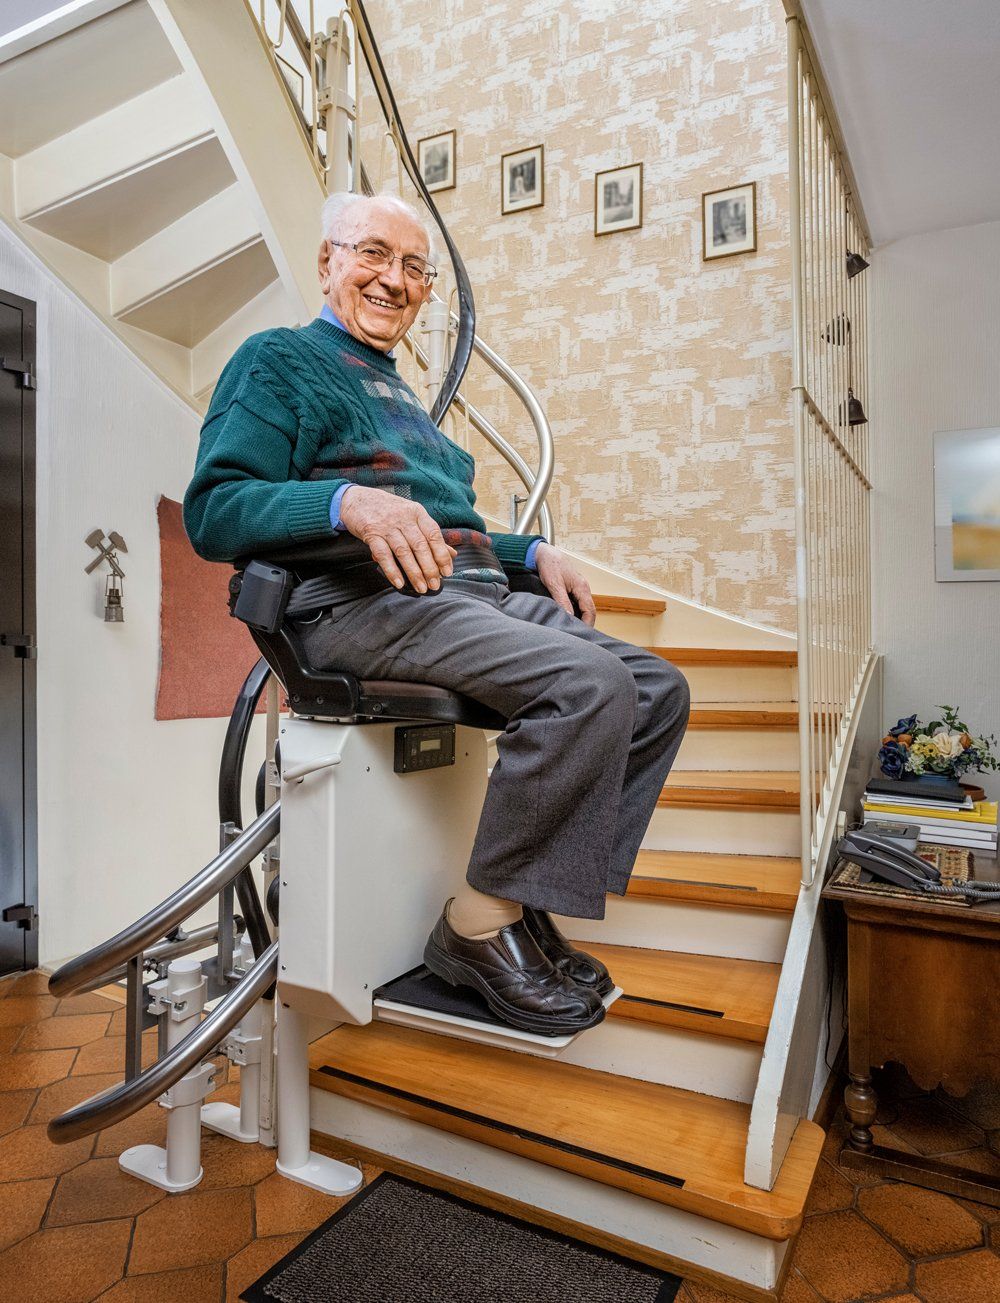 A Happy Old Man Sitting on a Stair Lift